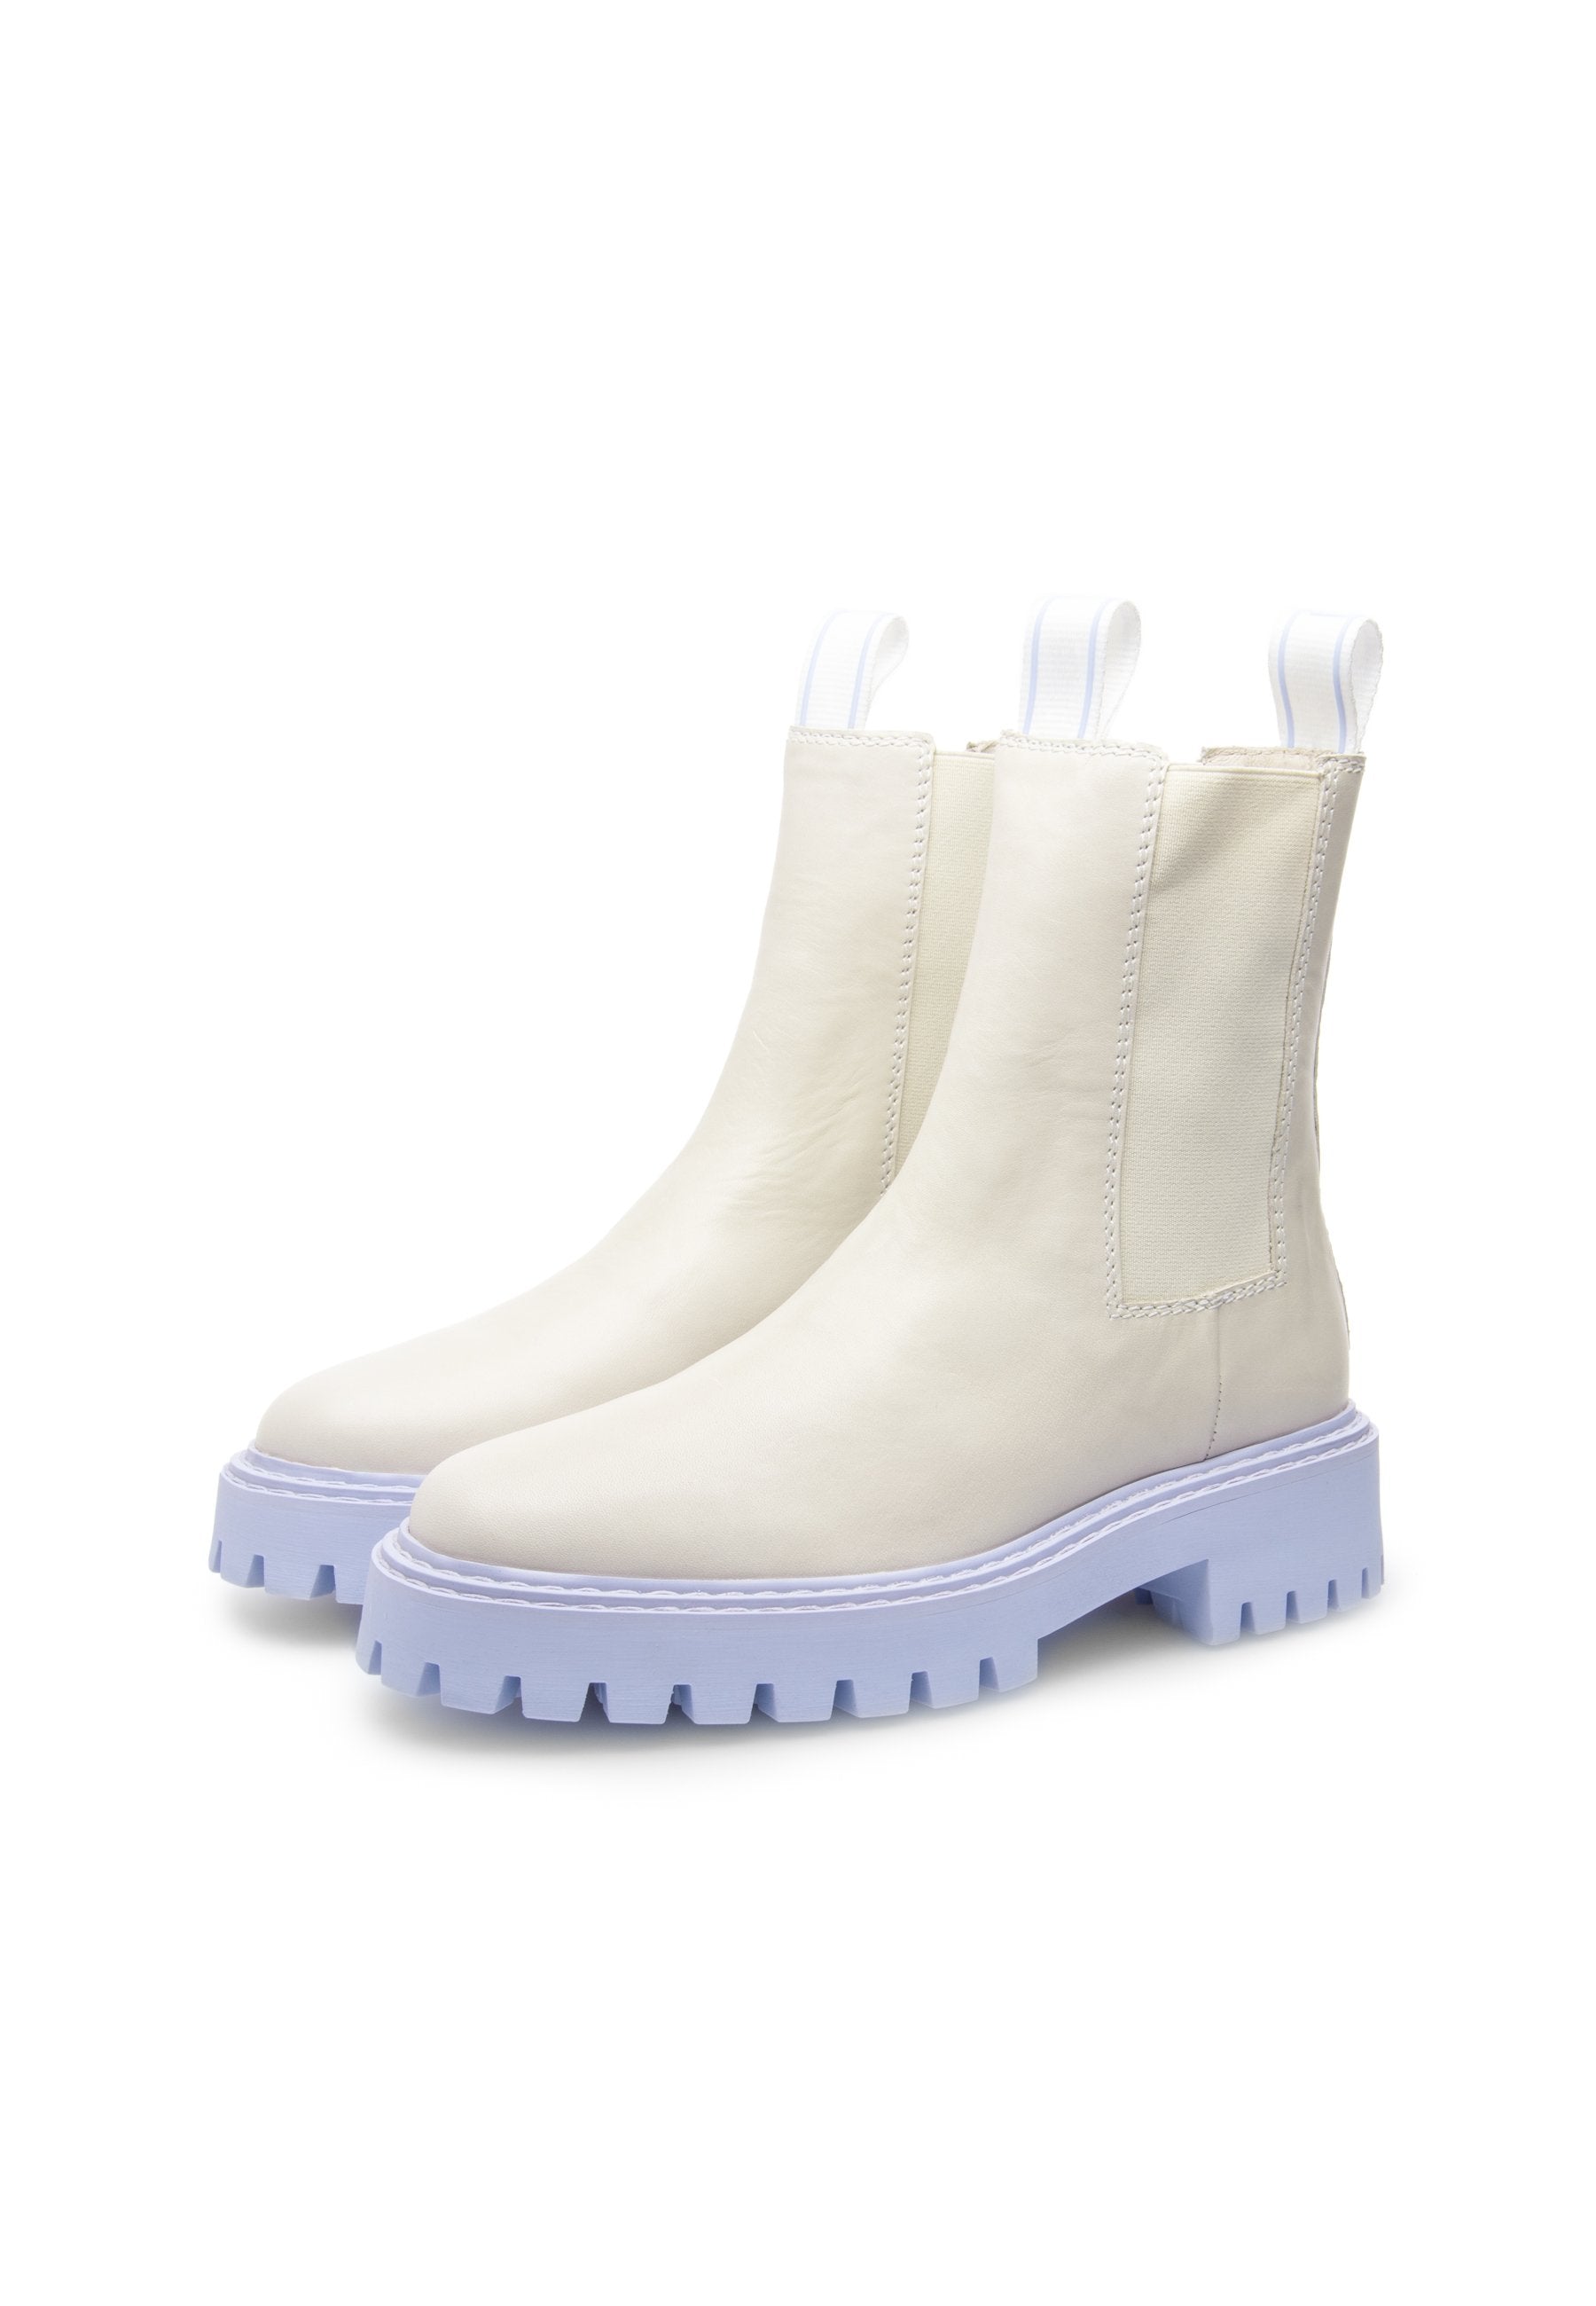 Daze Off White Leather Chelsea Boots LAST1502 - 3